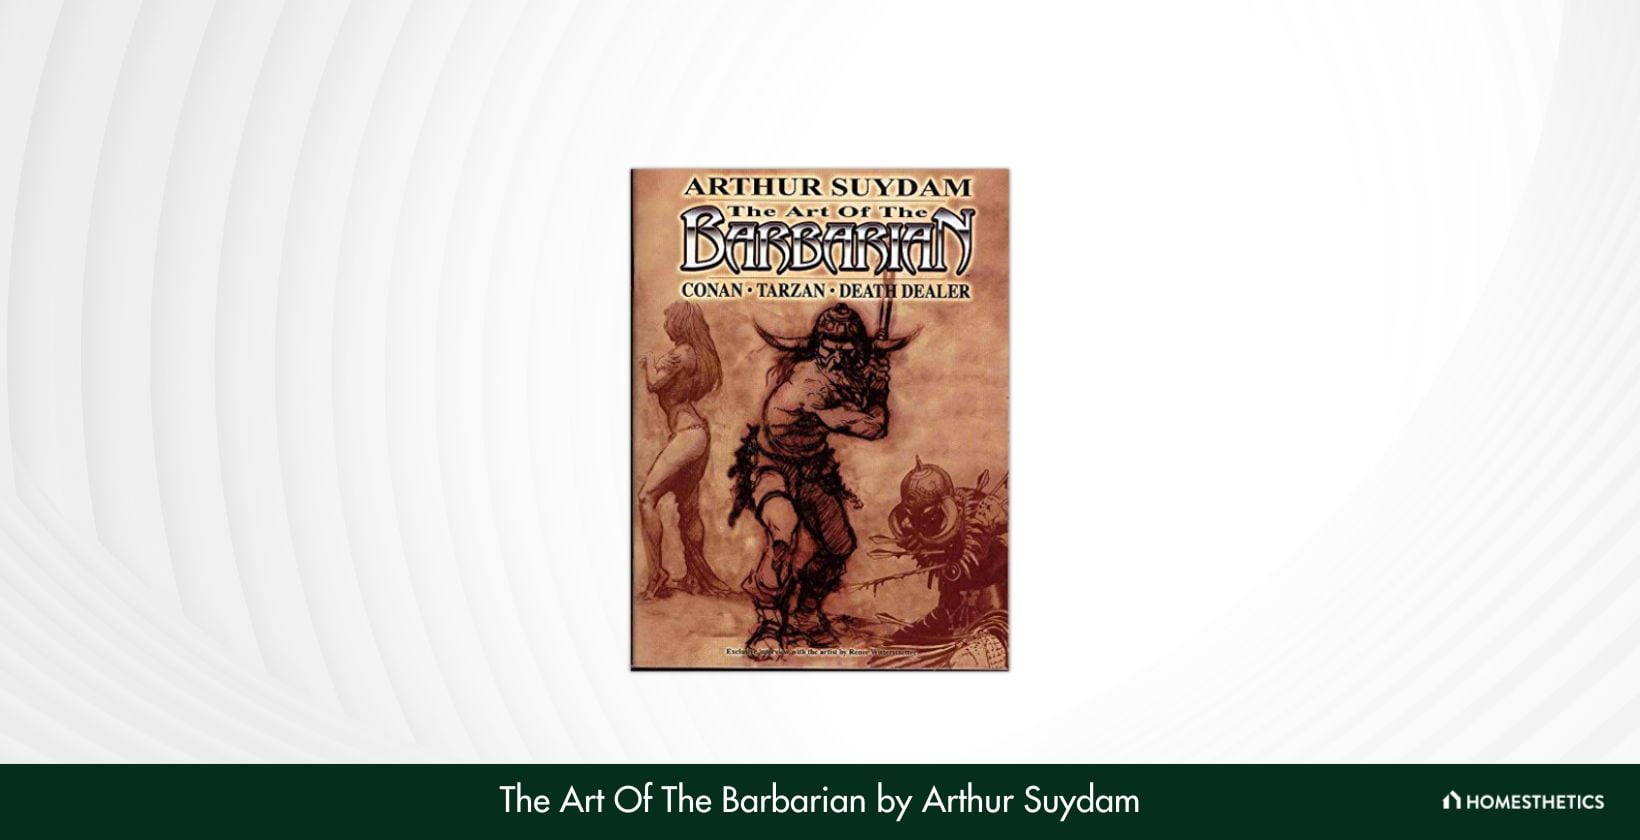 The Art Of The Barbarian by Arthur Suydam